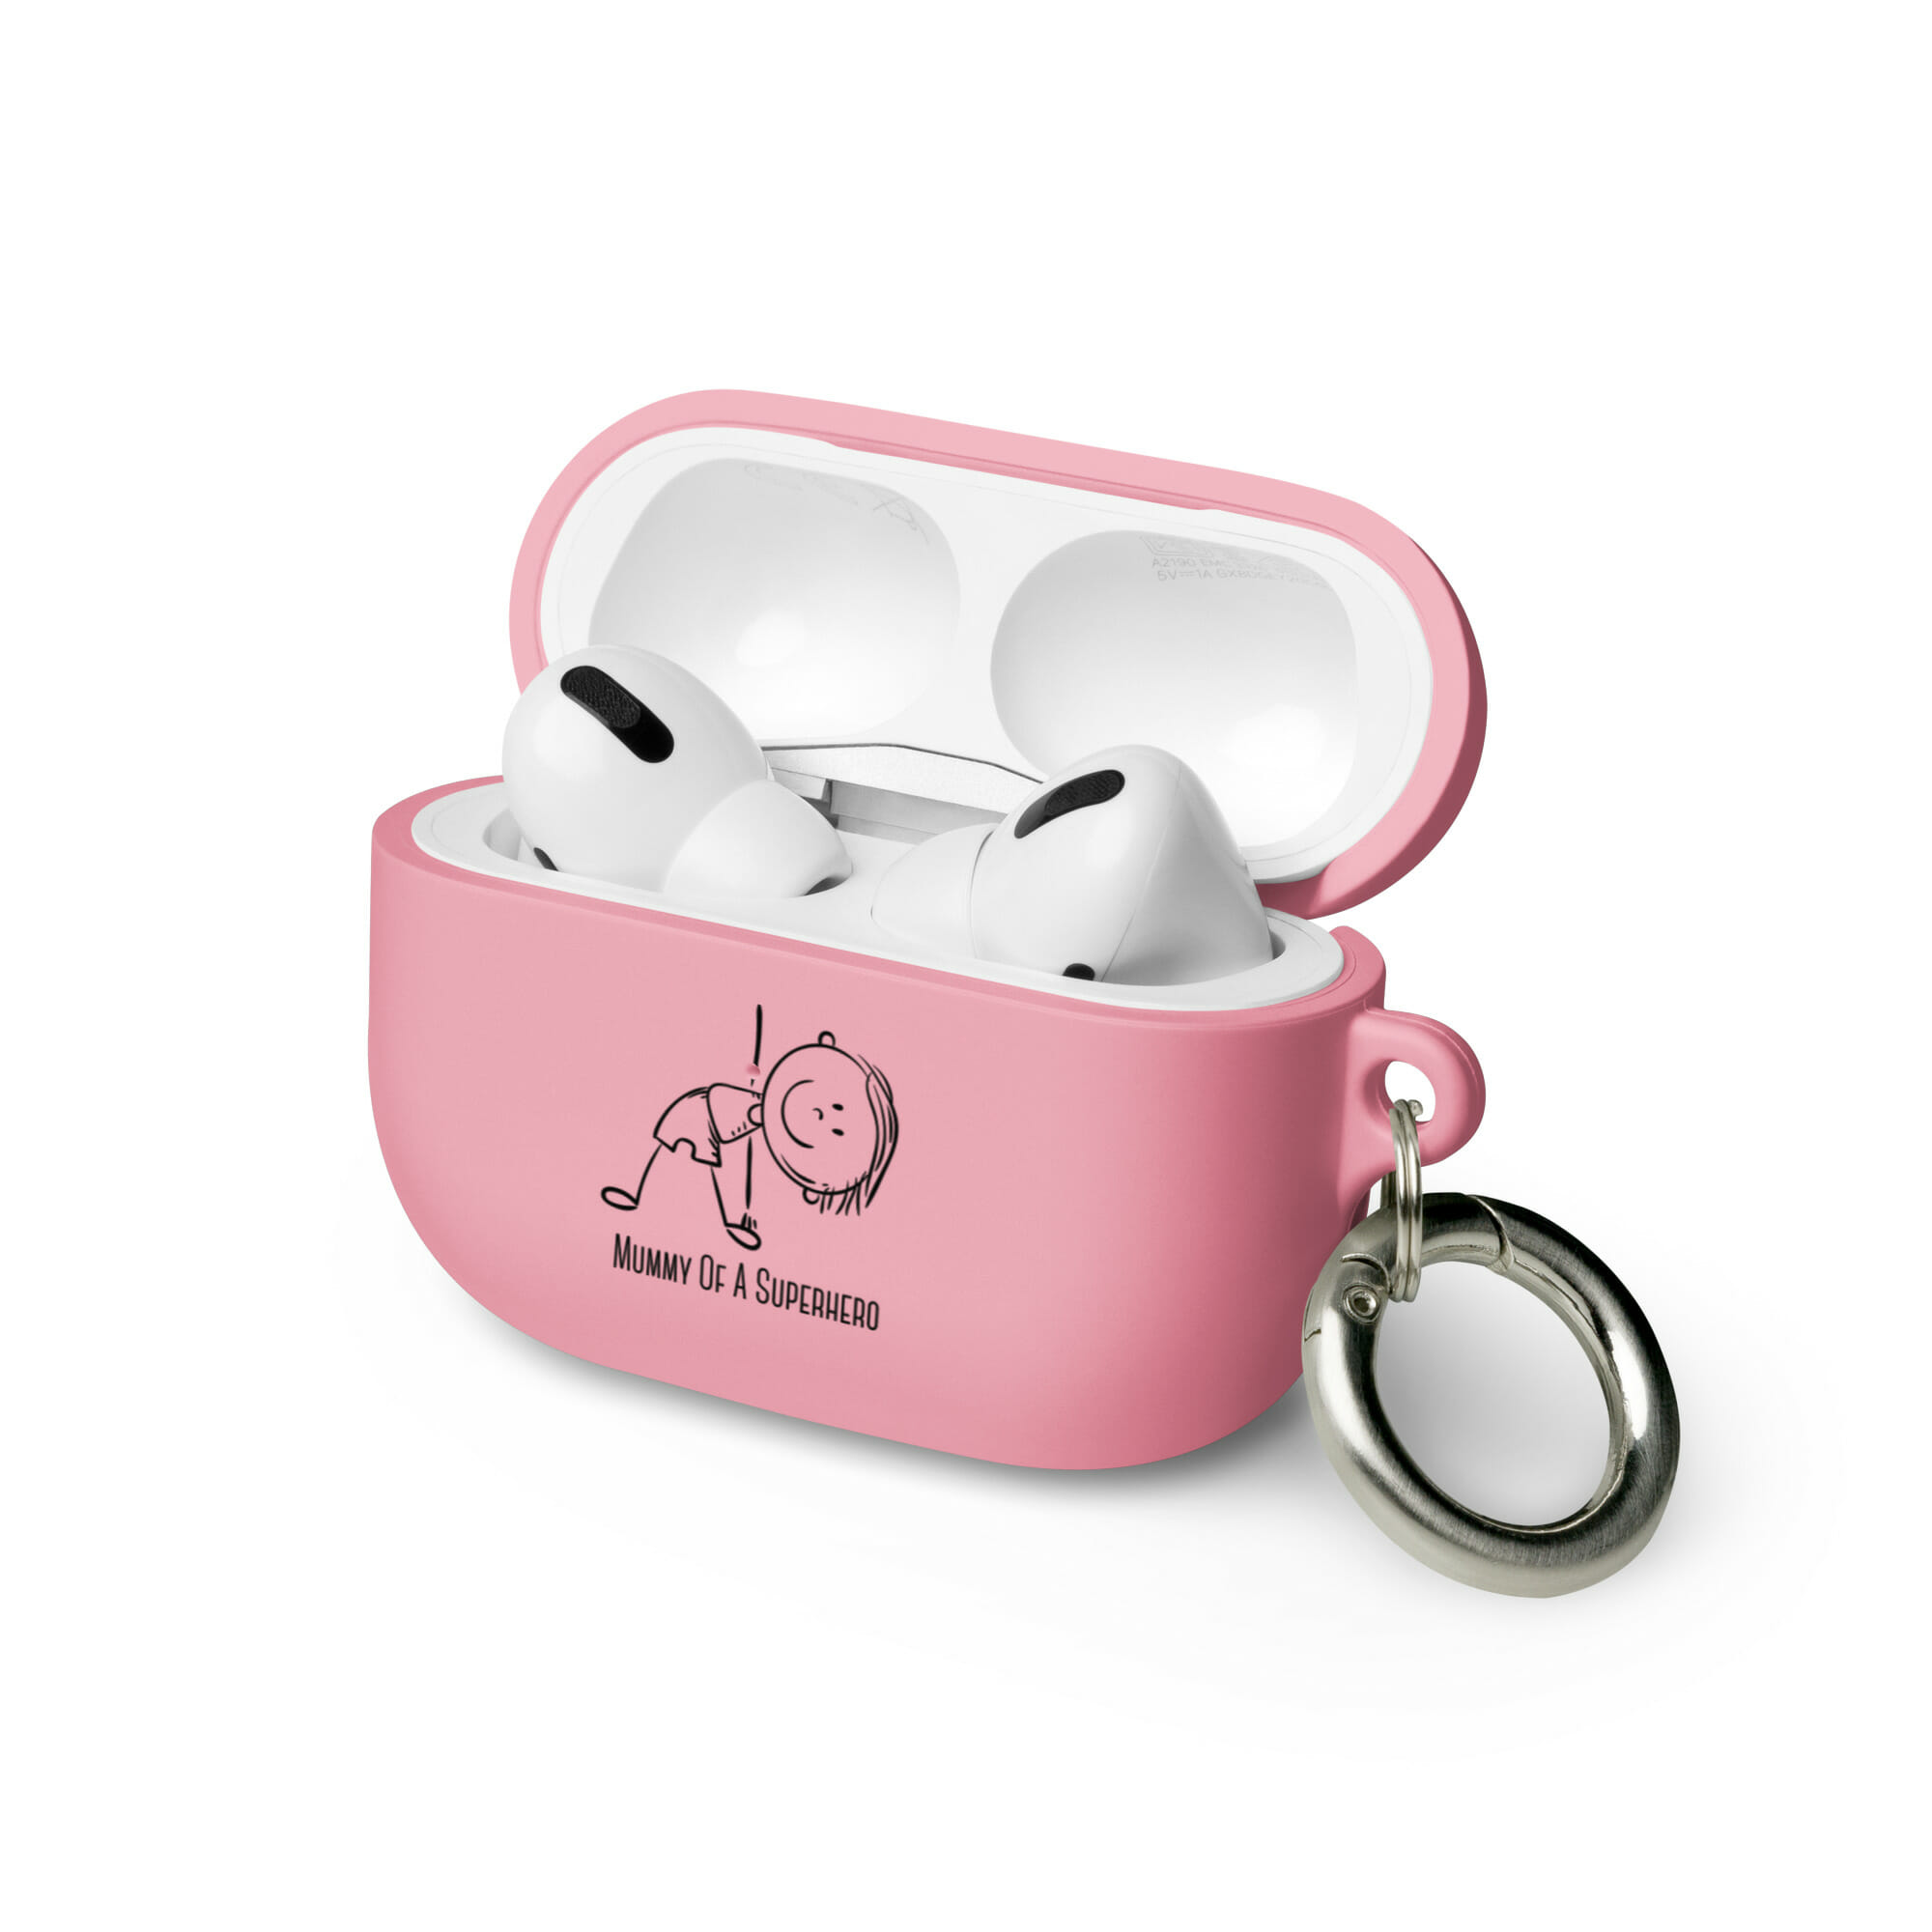 rubber-case-for-airpods-pink-airpods-pro-front-647affe278b3c.jpg